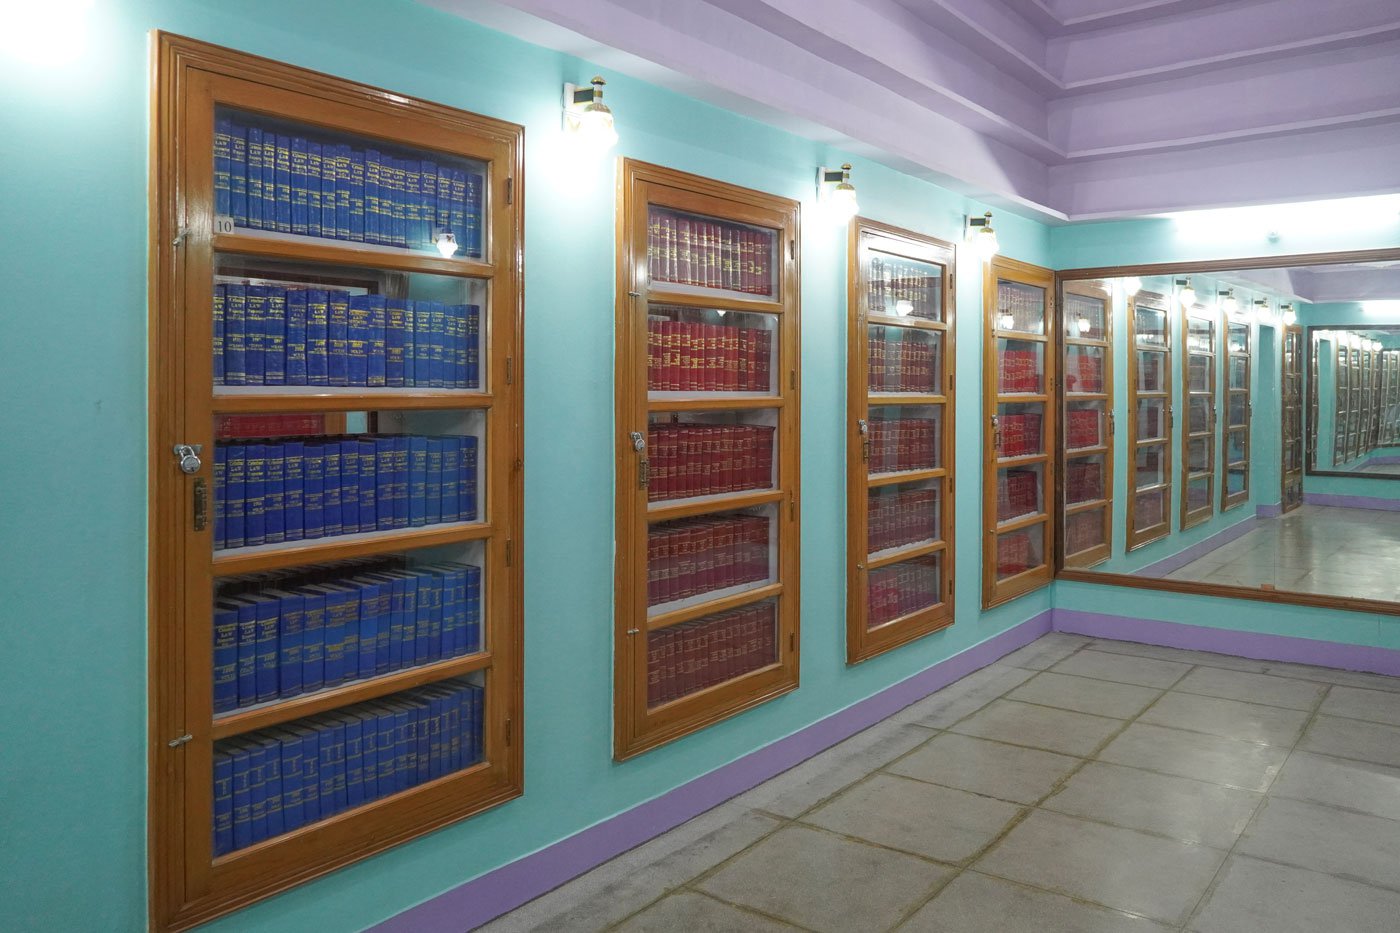 The library is spread across 15,000 square feet; its narrow corridors are lined with 562 cupboards that hold over two lakh books